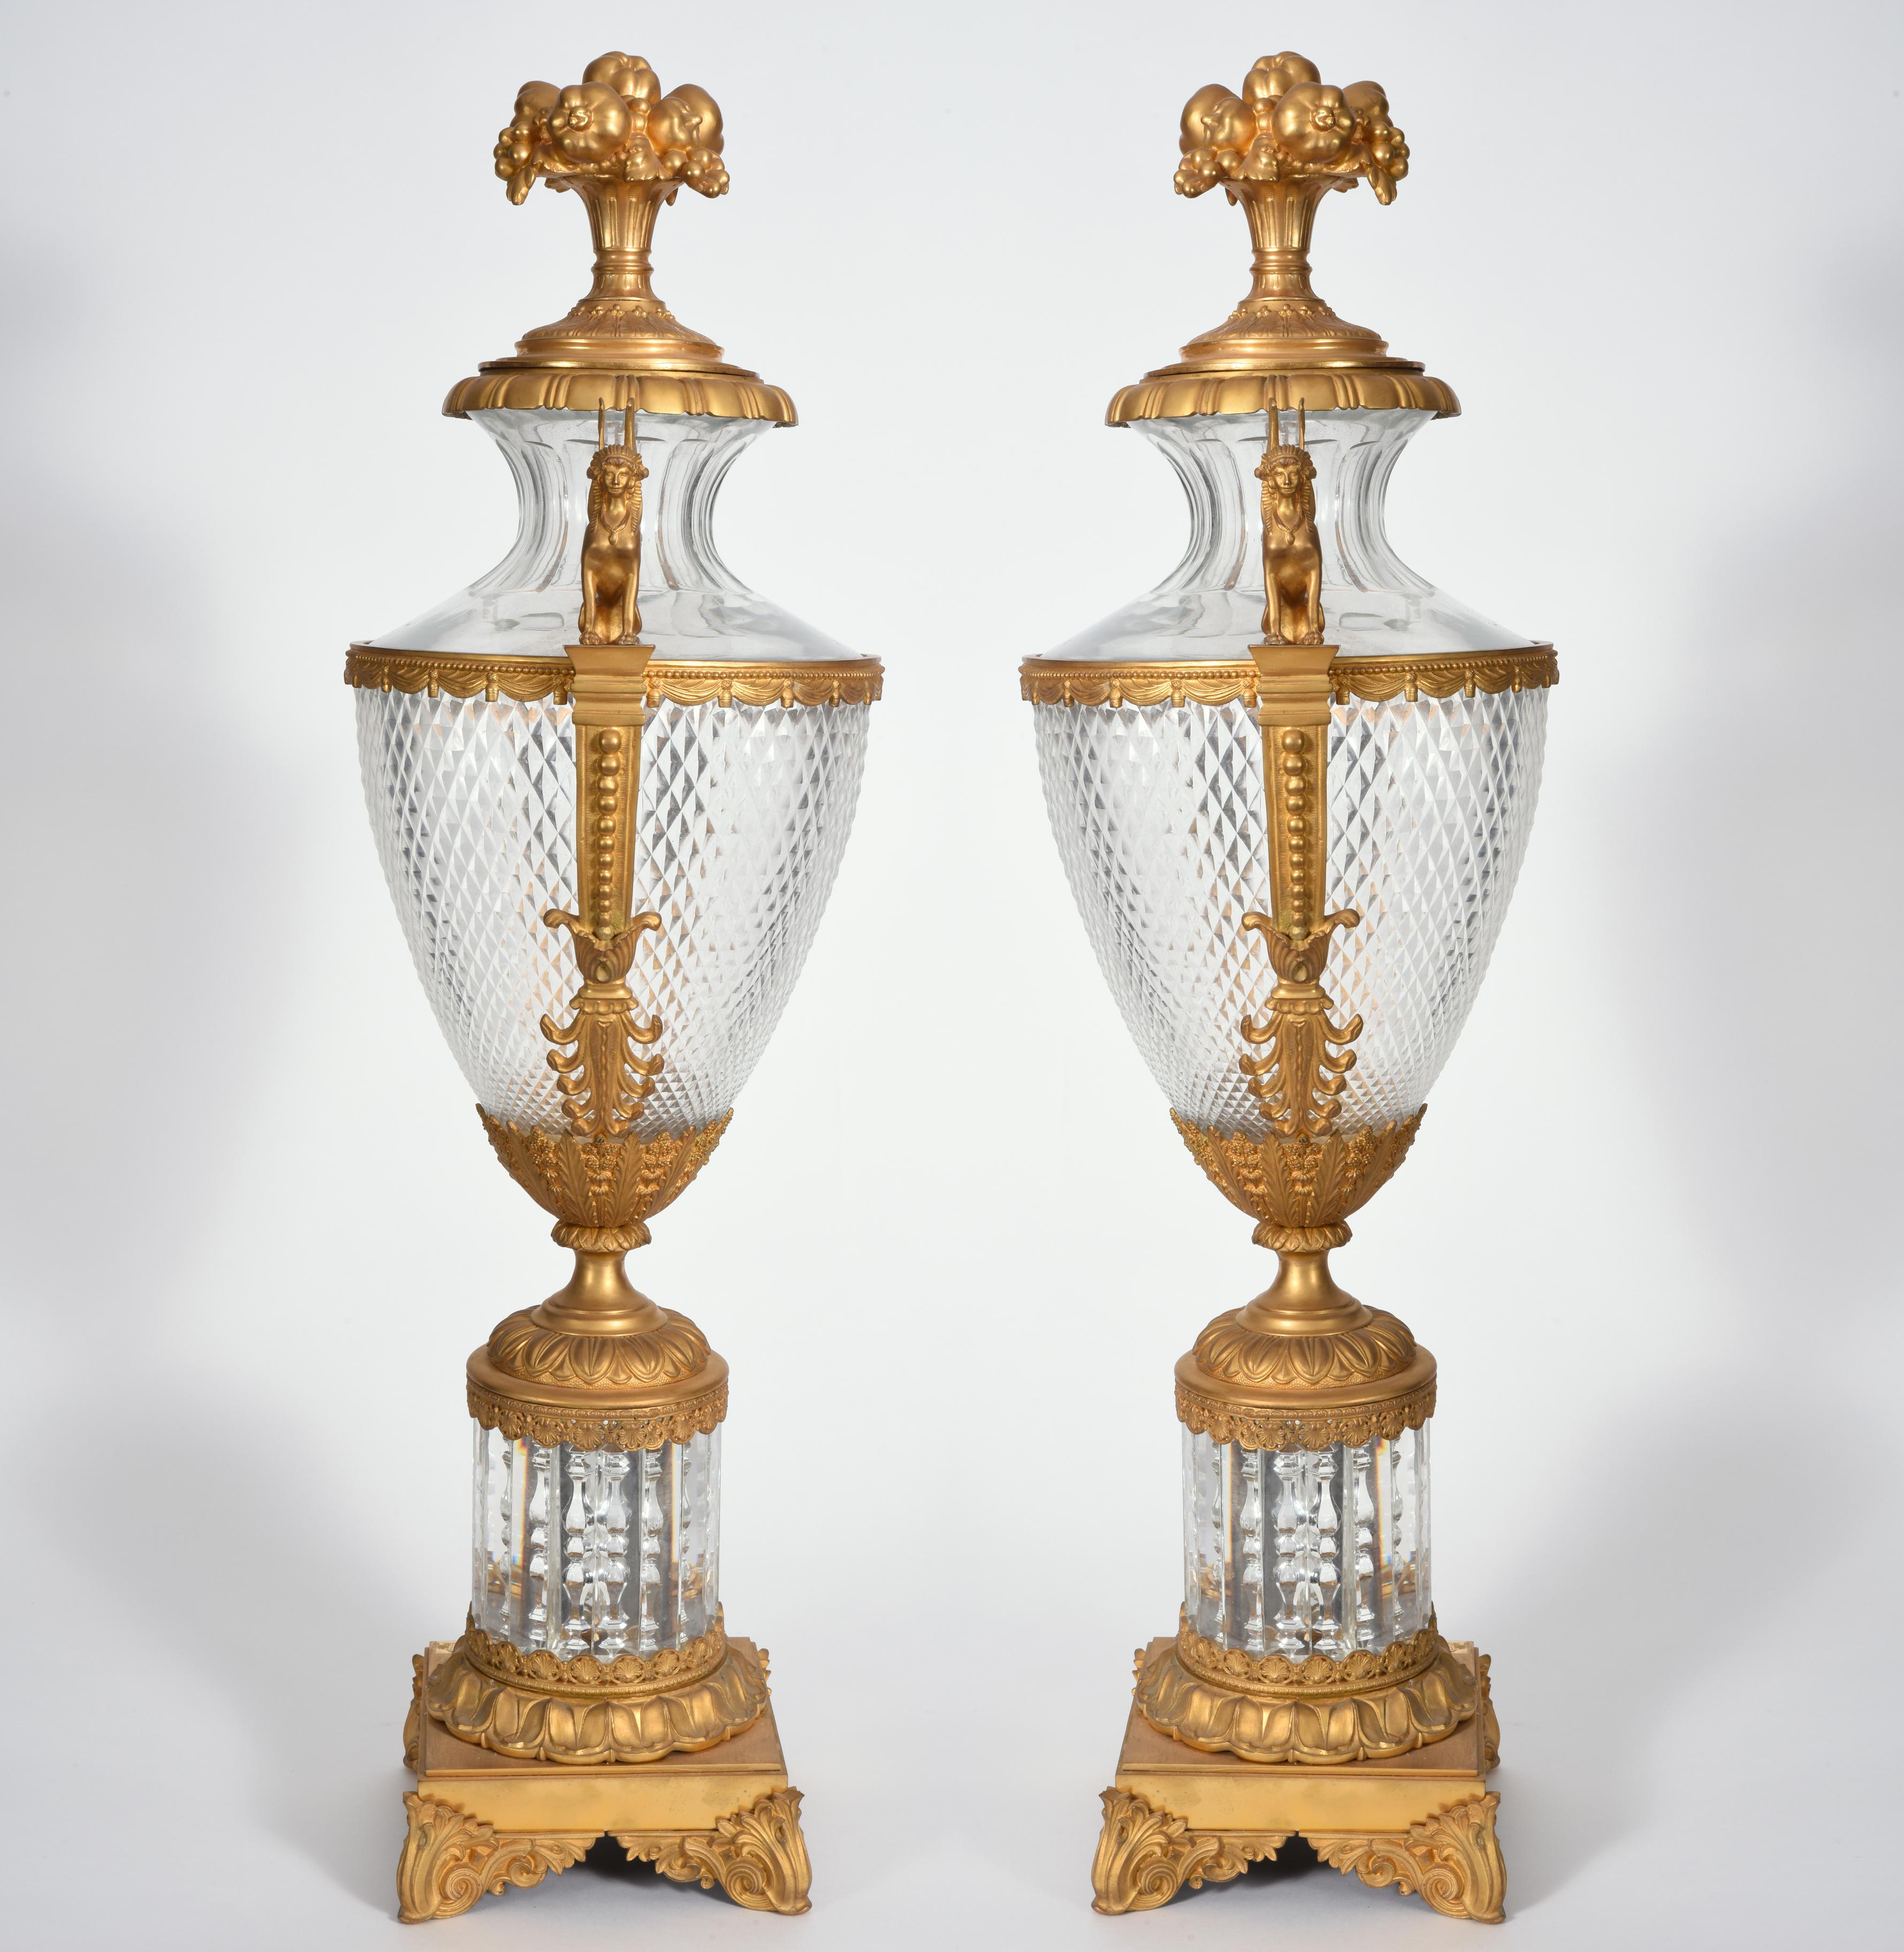 Mid-19th century very large matching pair bronze with cut glass decorative centerpiece urns. Each urn is in excellent antique condition with minor wear consistent to age and use. Each decorative urn measure about 36 inches x 12 inches x 10.5 inches.